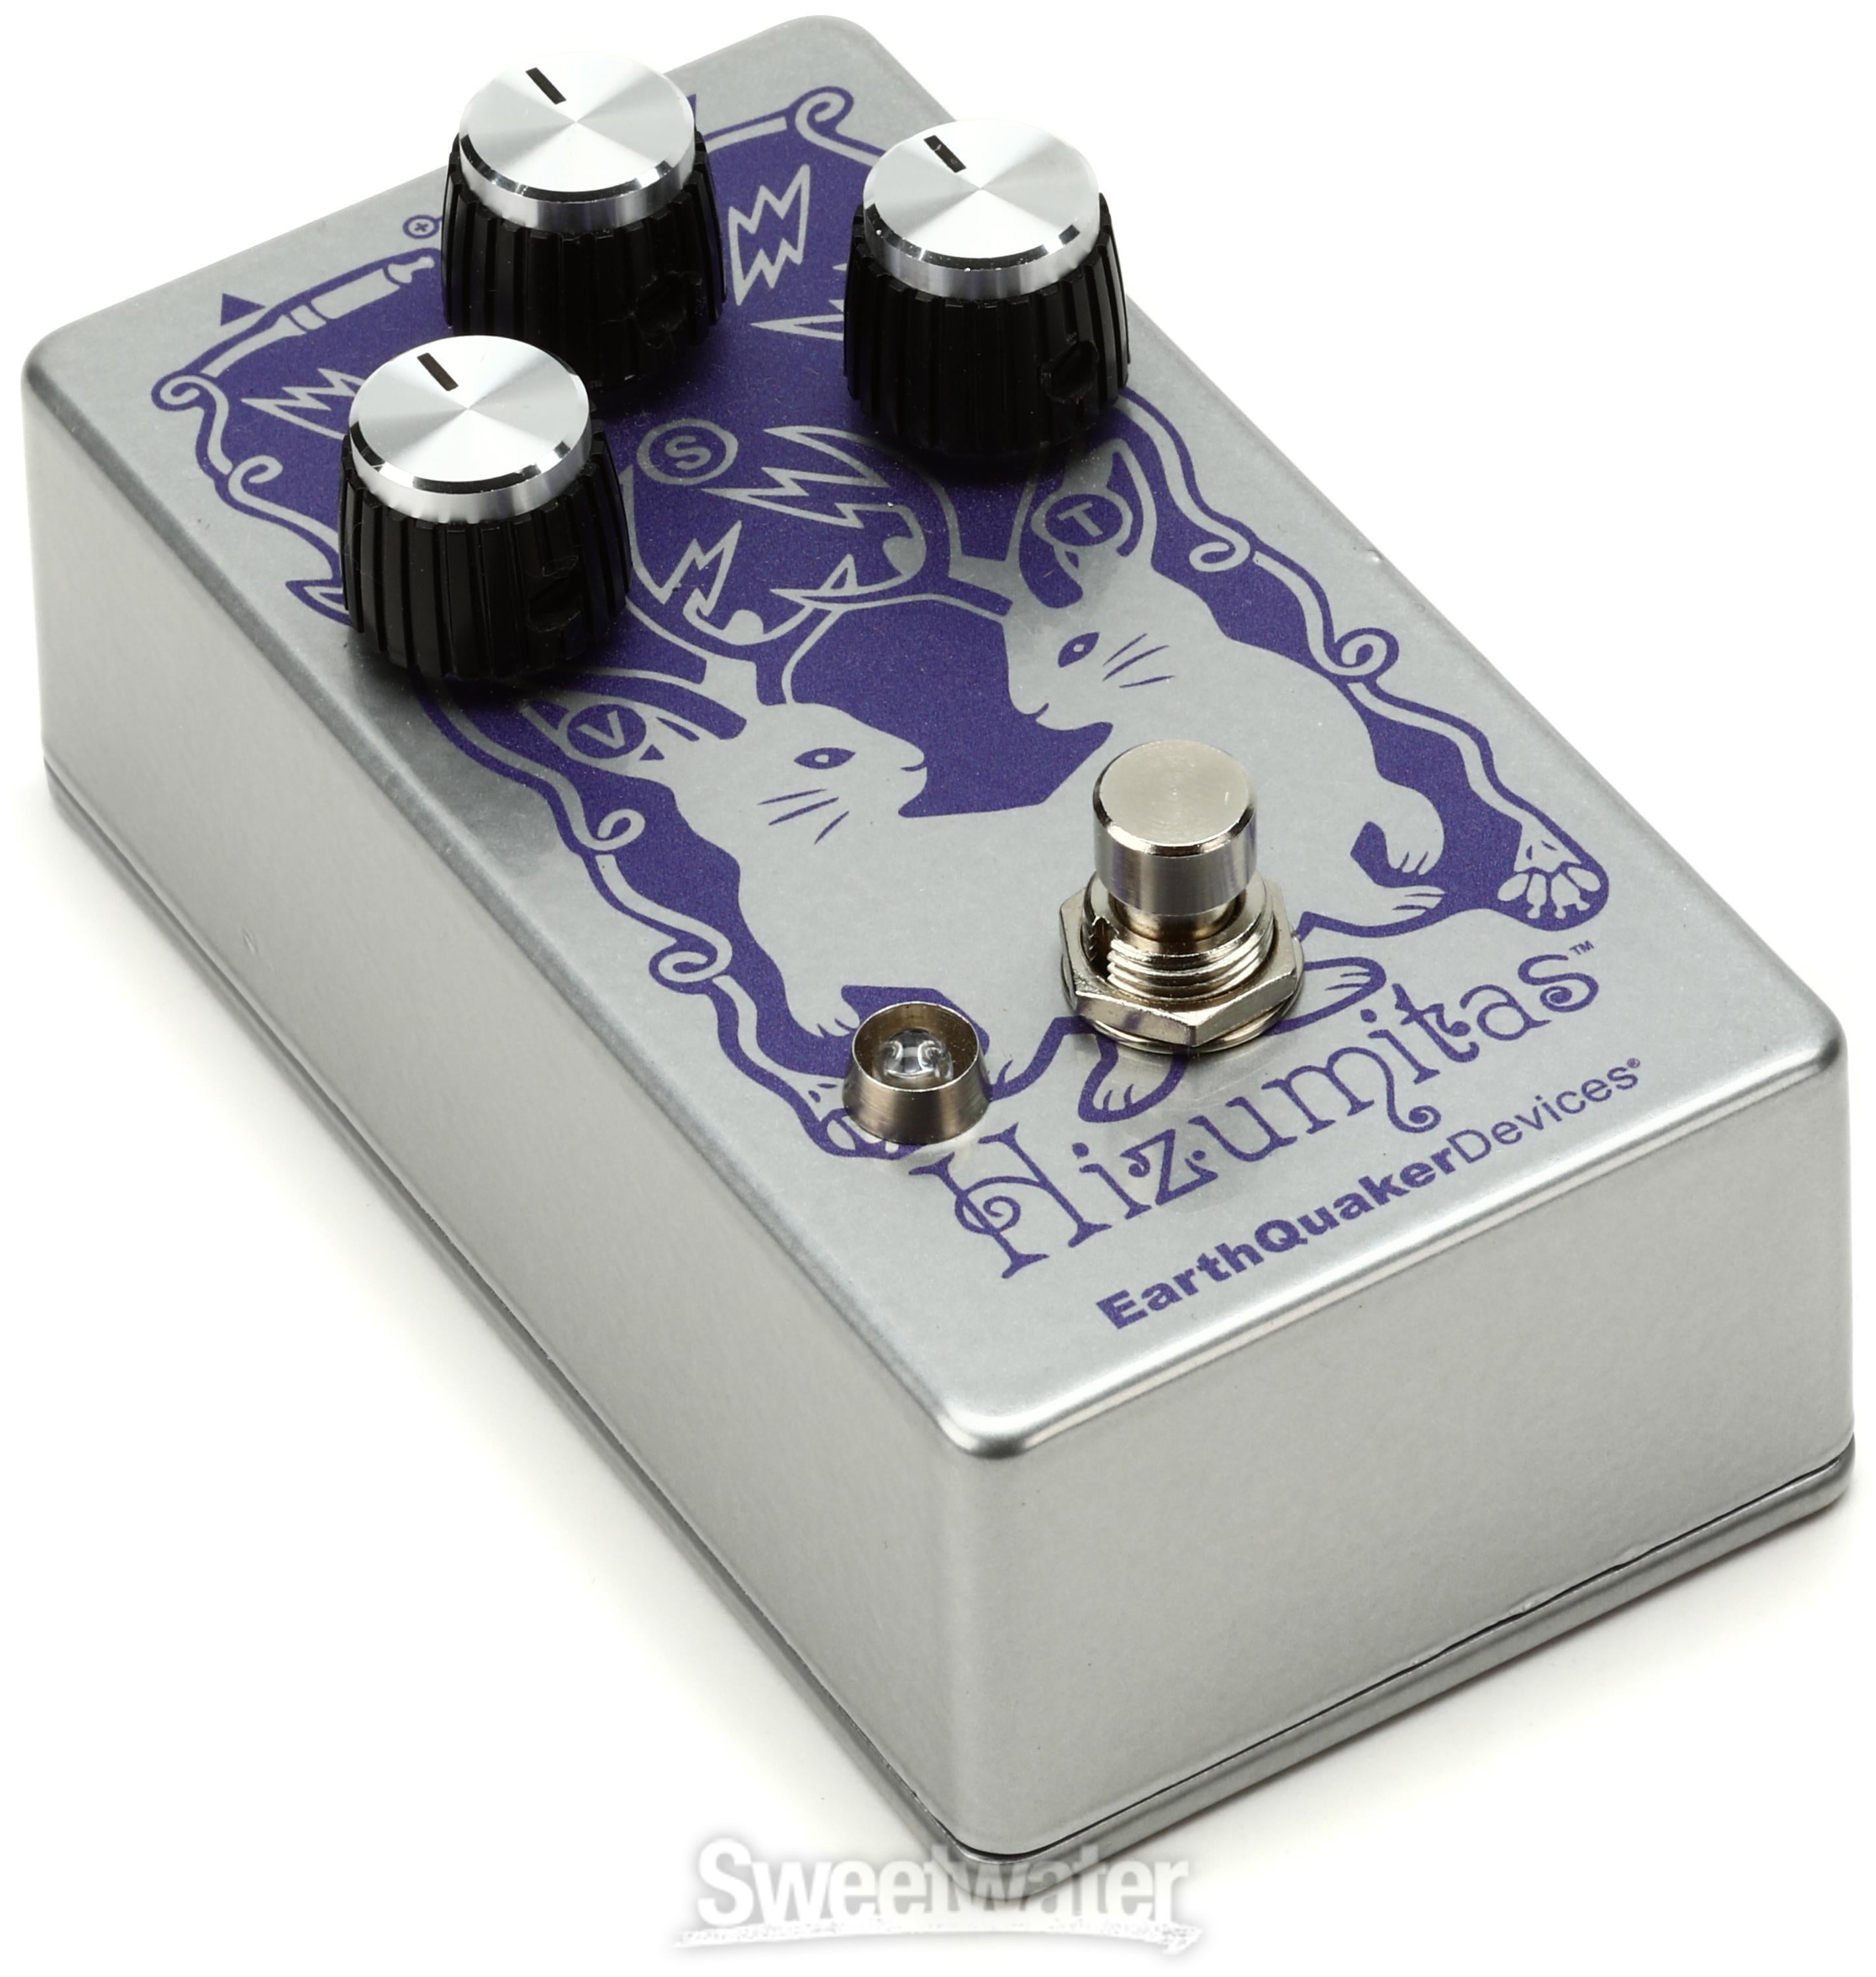 EarthQuaker Devices Hizumitas Fuzz Sustainar Pedal | Sweetwater